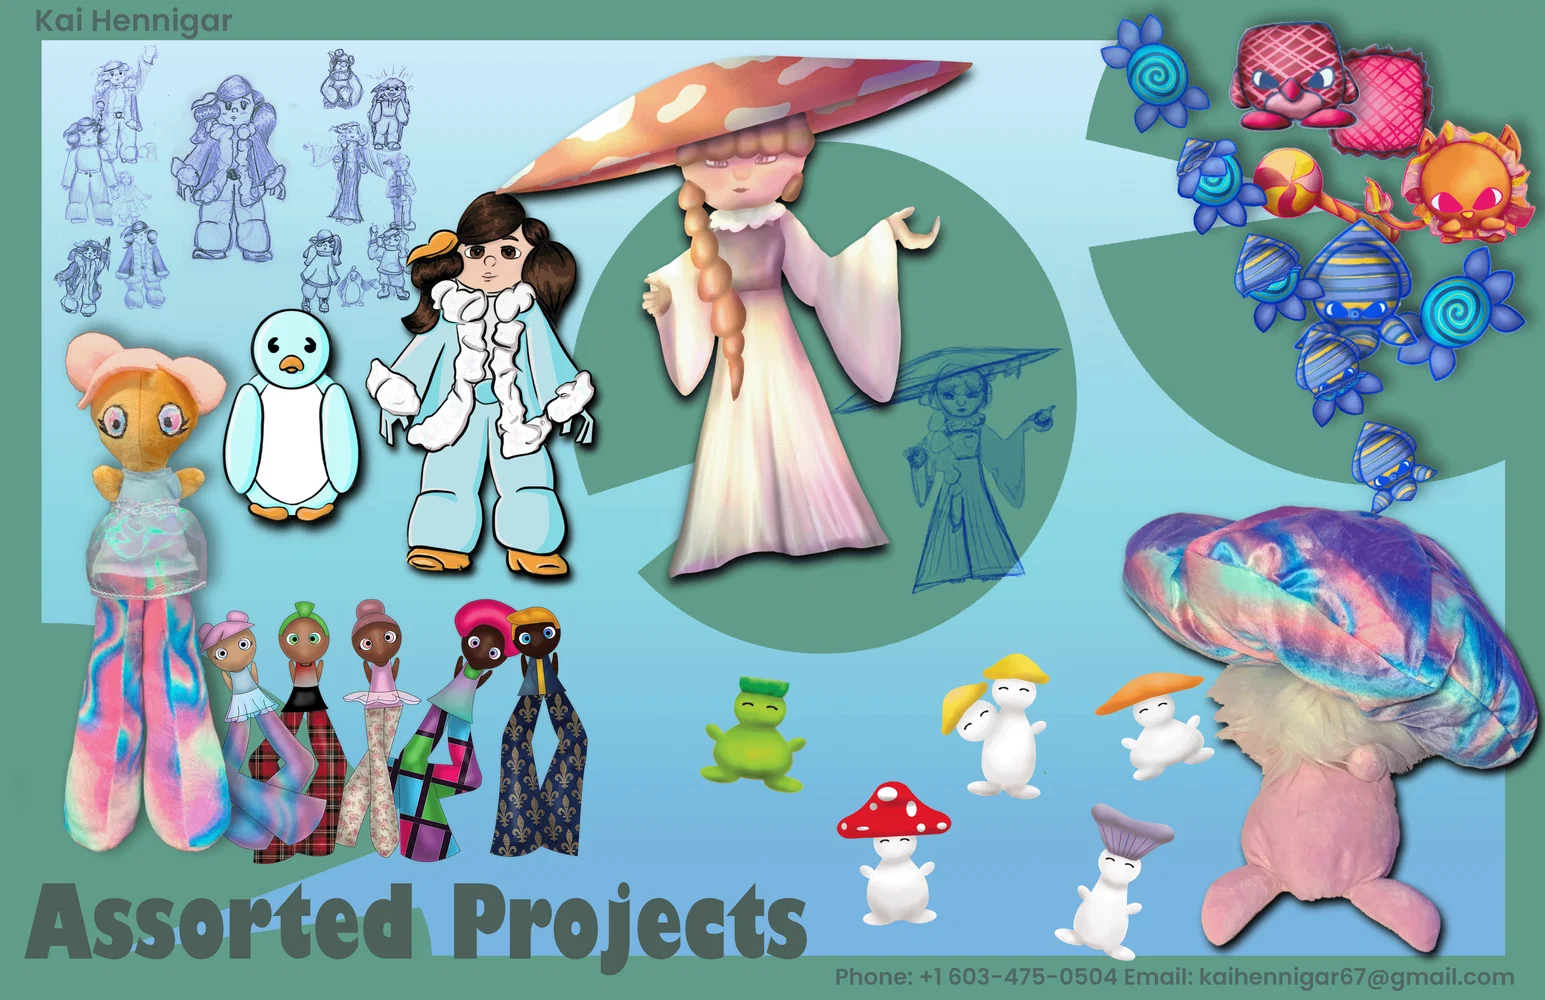 A collage of toy design projects featuring; a small girl in puffy winter jacket with her small pet penguin next to sketchs of her other designs, there is a plush design of a girl with very proportionally long legs in a tie-dye fabric, next to sketches of similar designed plushes, a girl in all white clothes with a large anita mushroom cap hat next to a sketch of a previous design of hers, there are 3 designs of flippable plushes next to an illustration how one of them flips from a squid into a candy design, lastly there is a plush mushroom next to 5 other mushroom plush designs